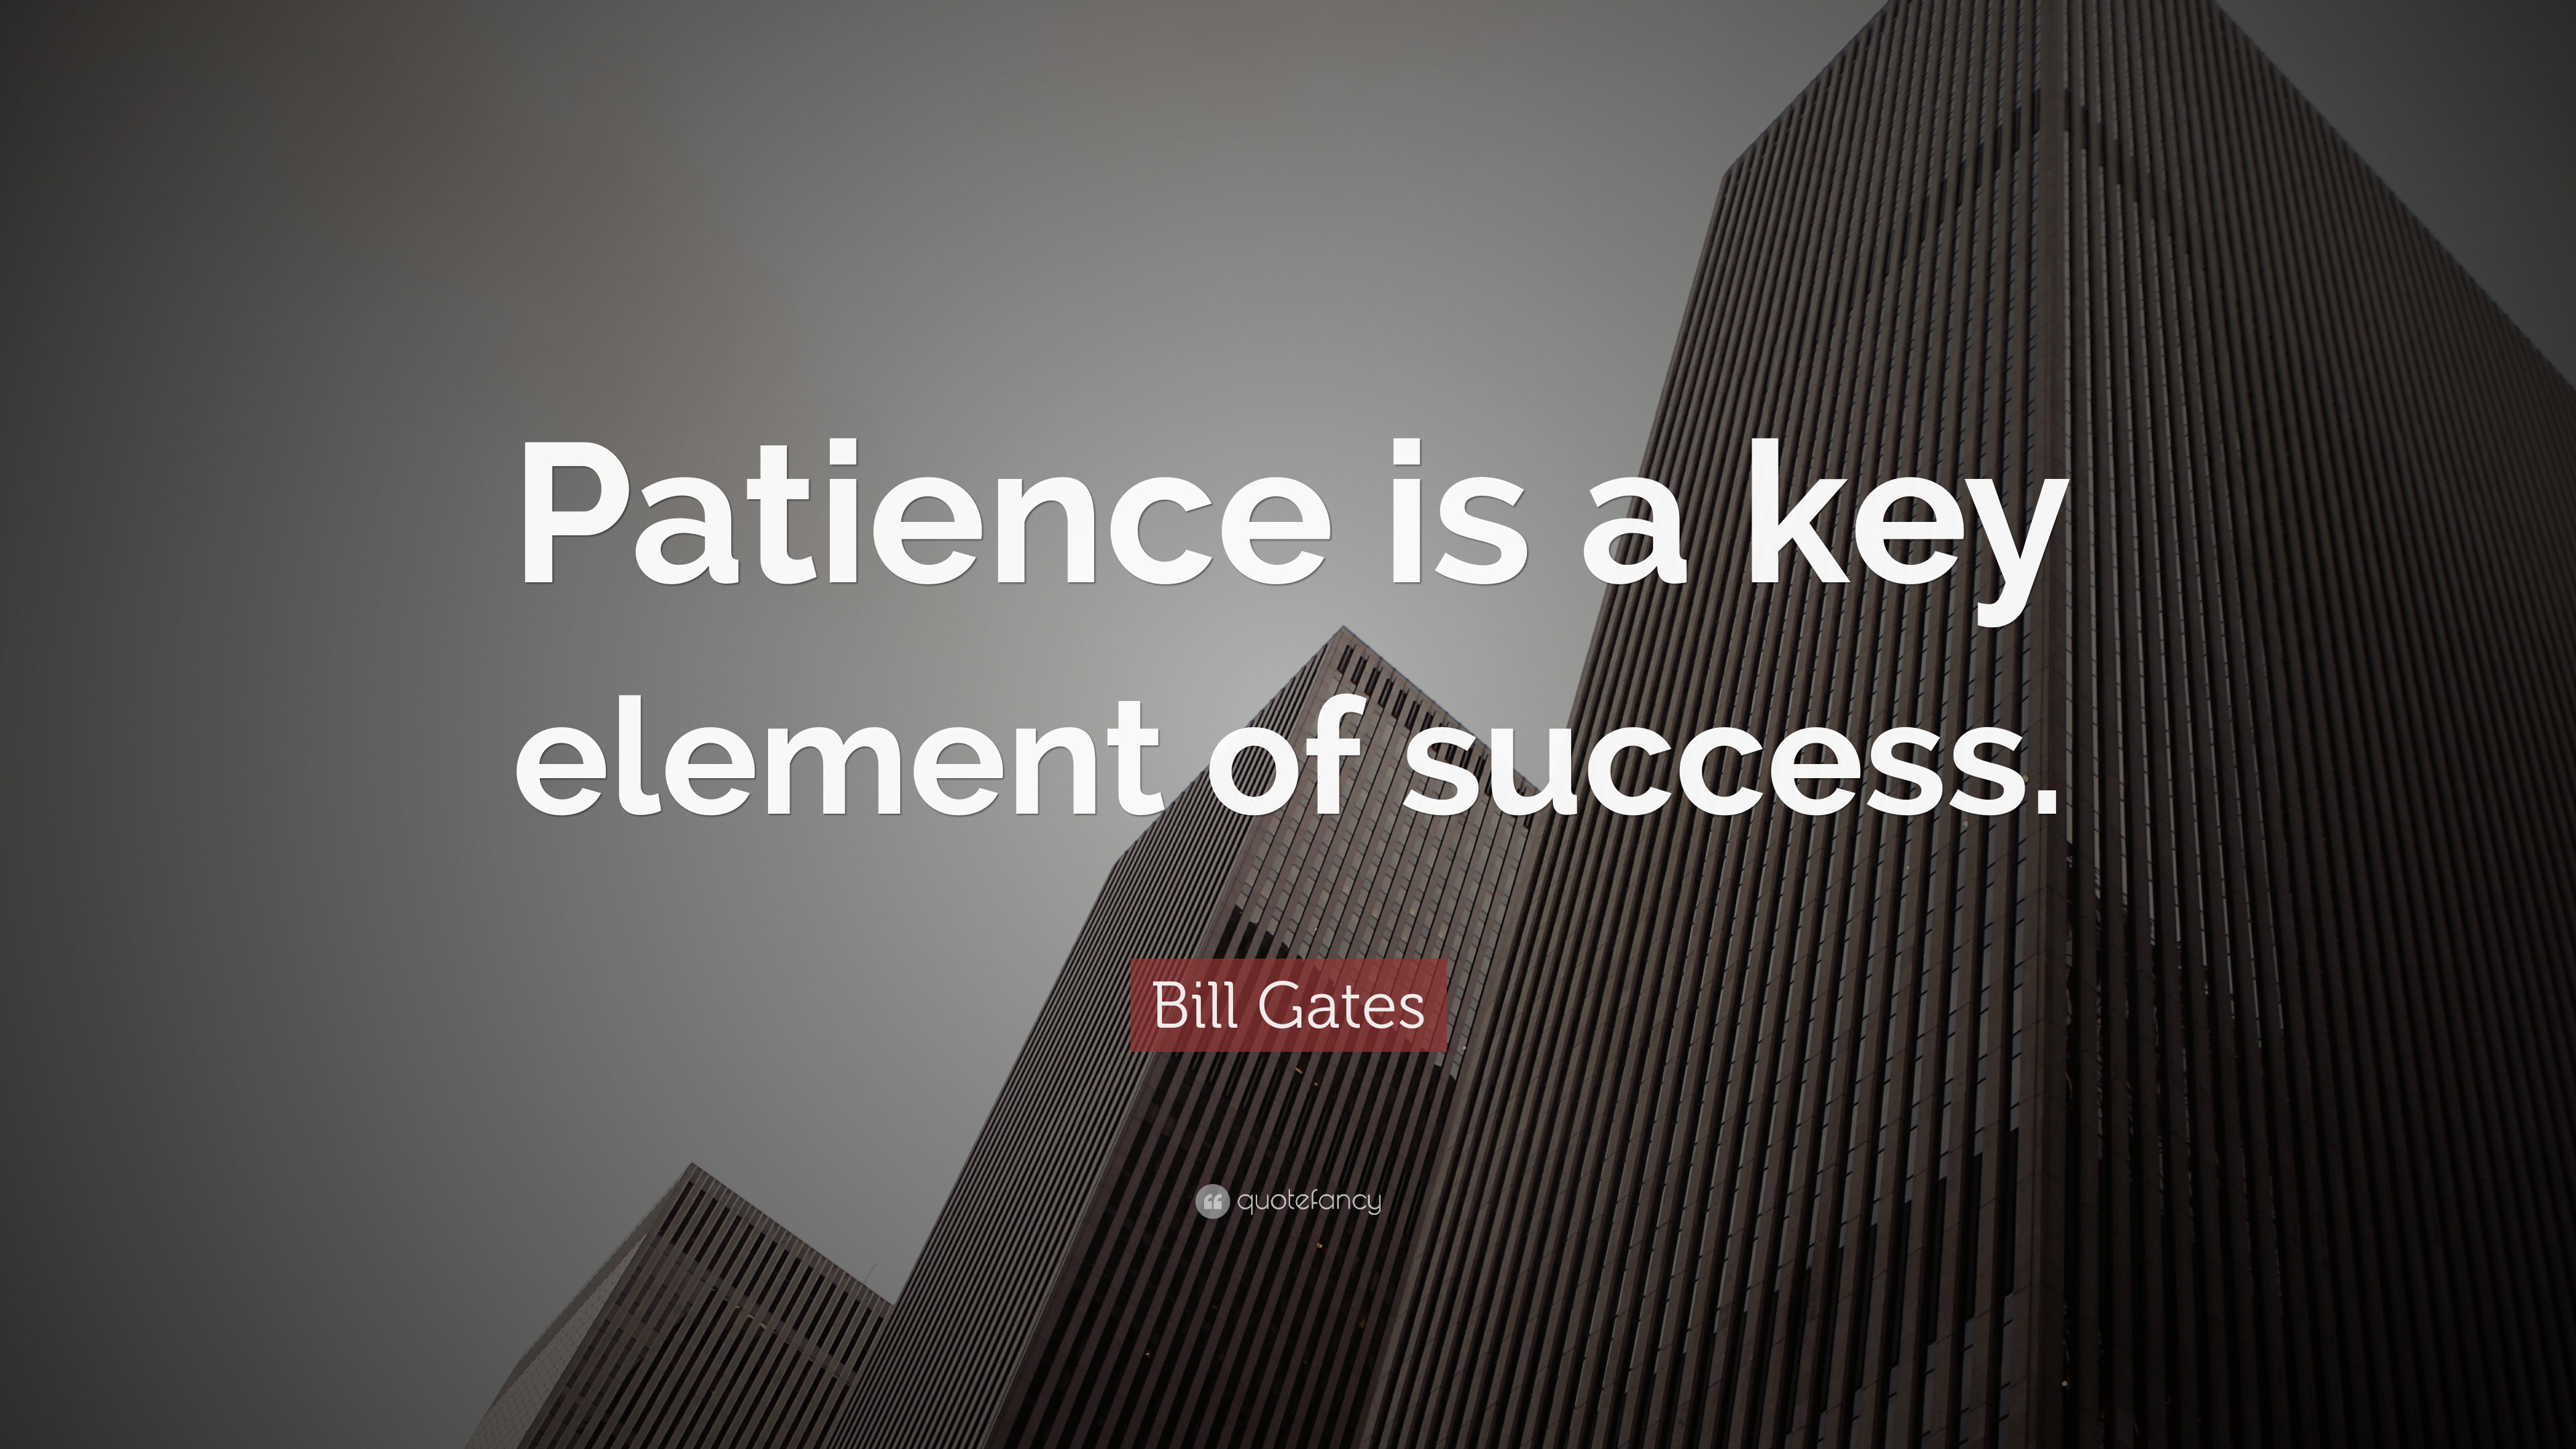 3840x2160 Bill Gates Quote: “Patience is a key element of success.”